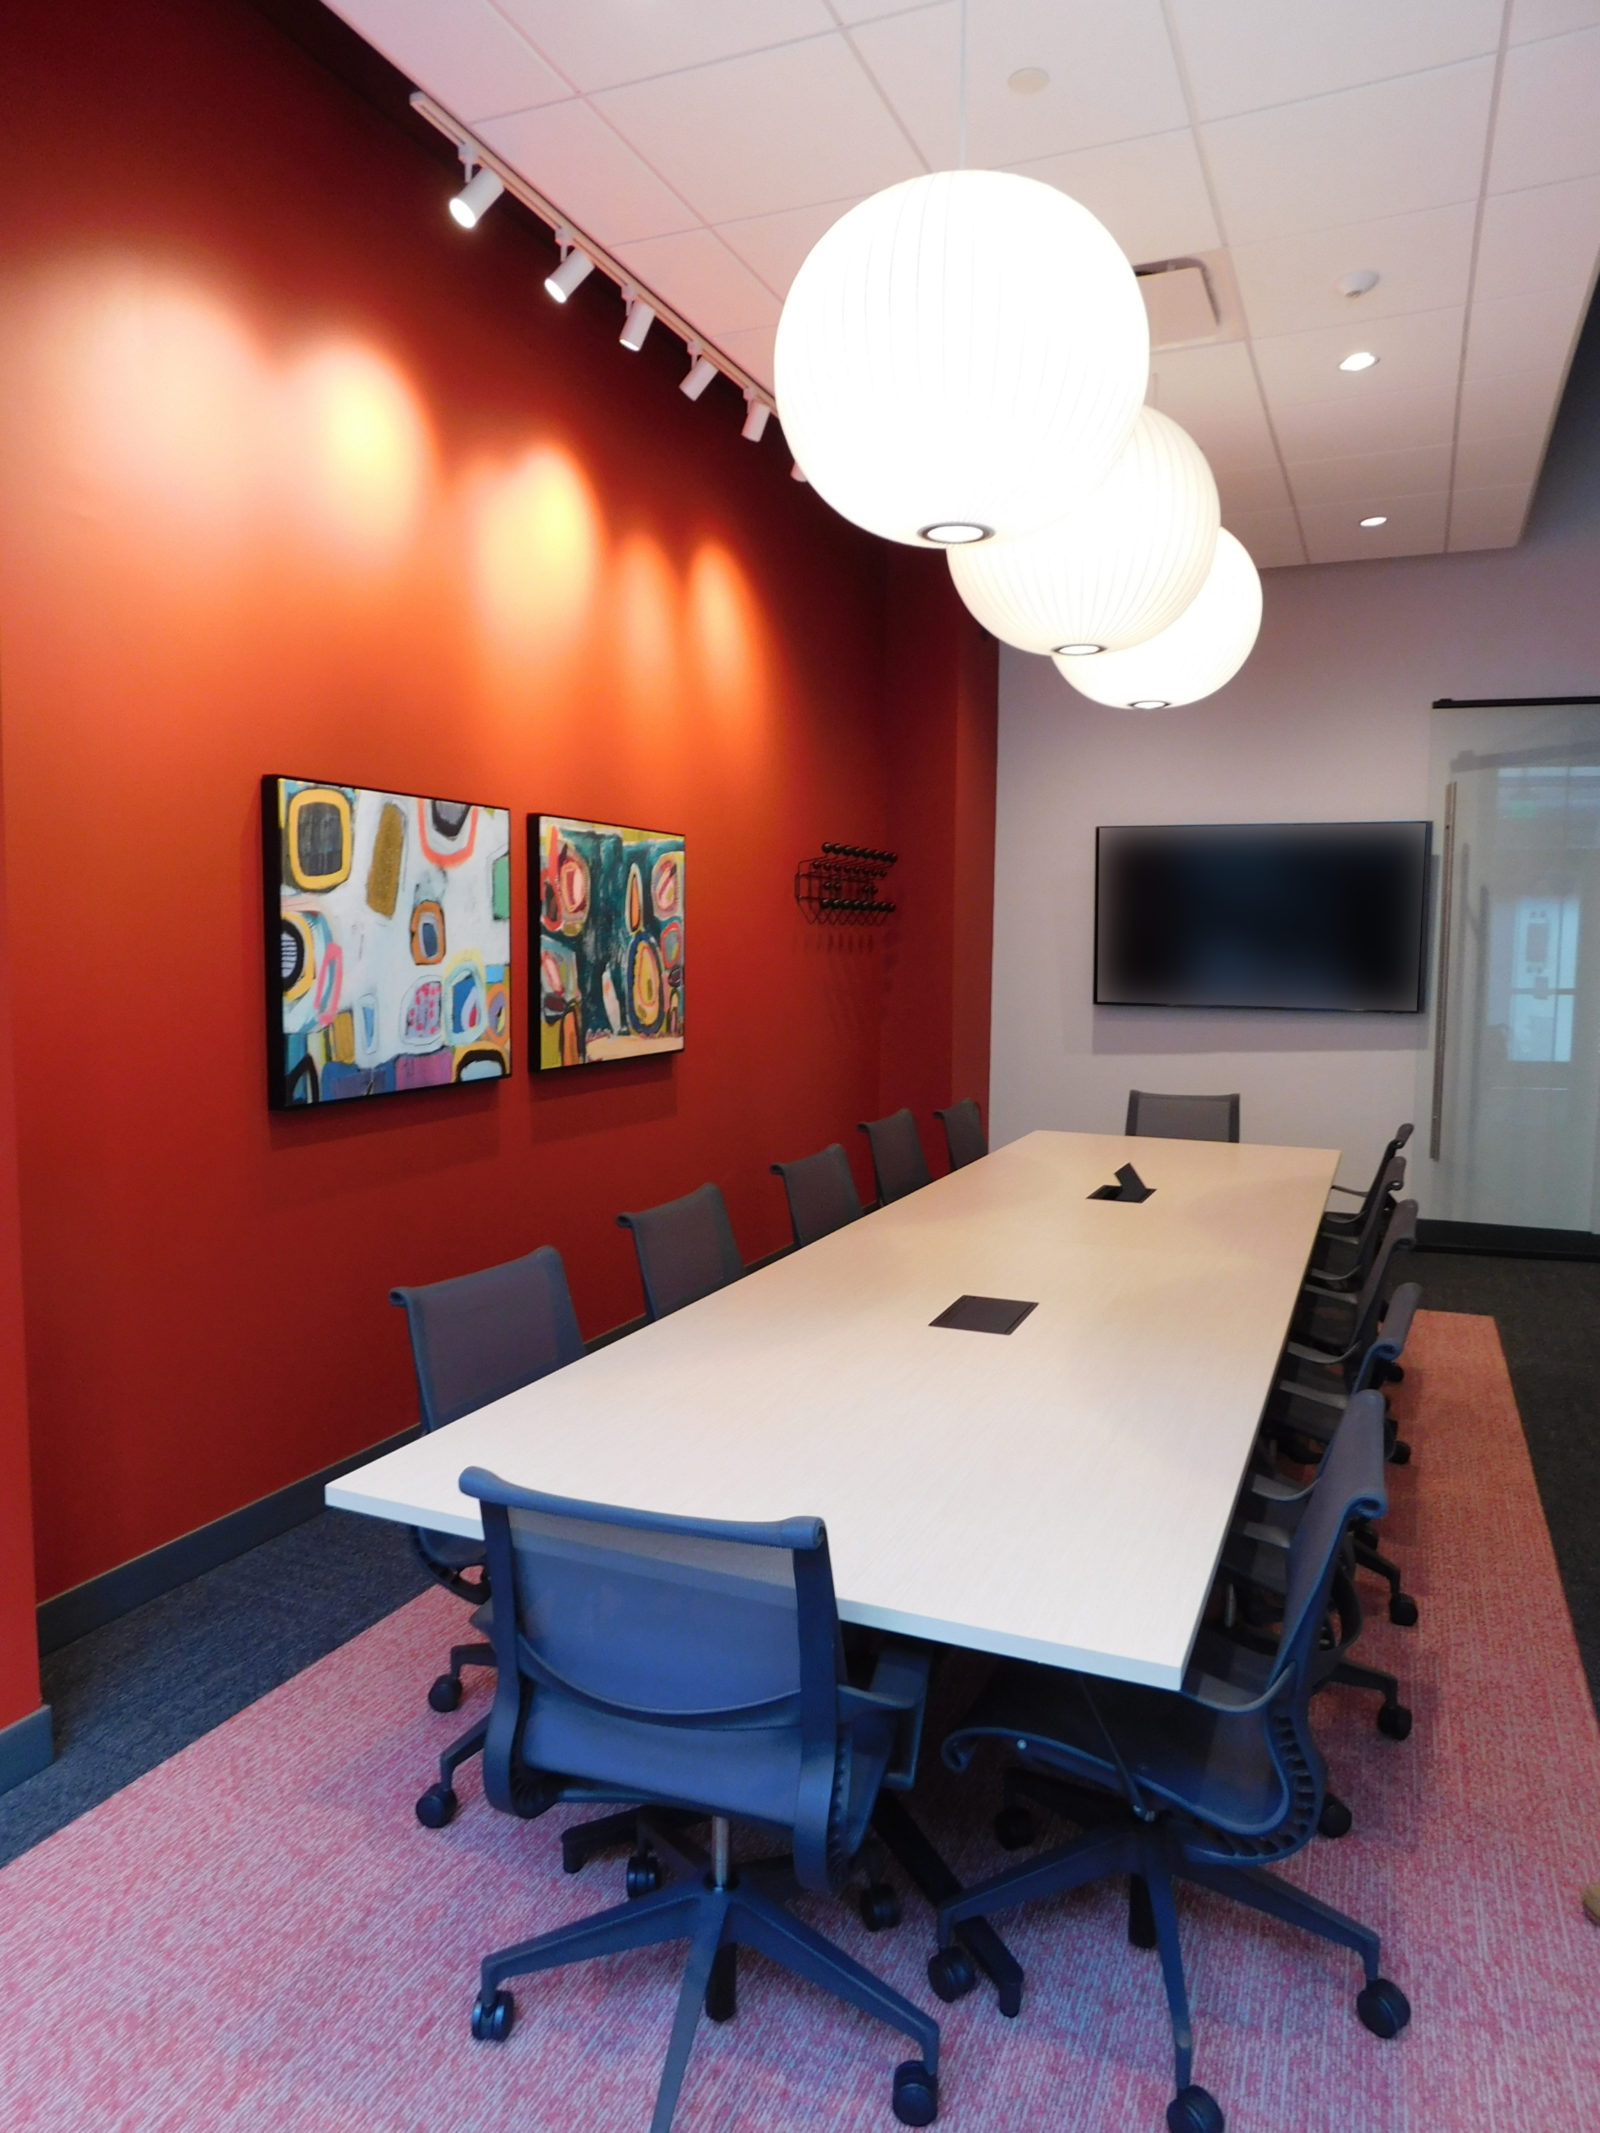 Conference room with white table and dark grey Herman Miller Setu chairs around. Red wall on left; 3 white bubble lamps above table.